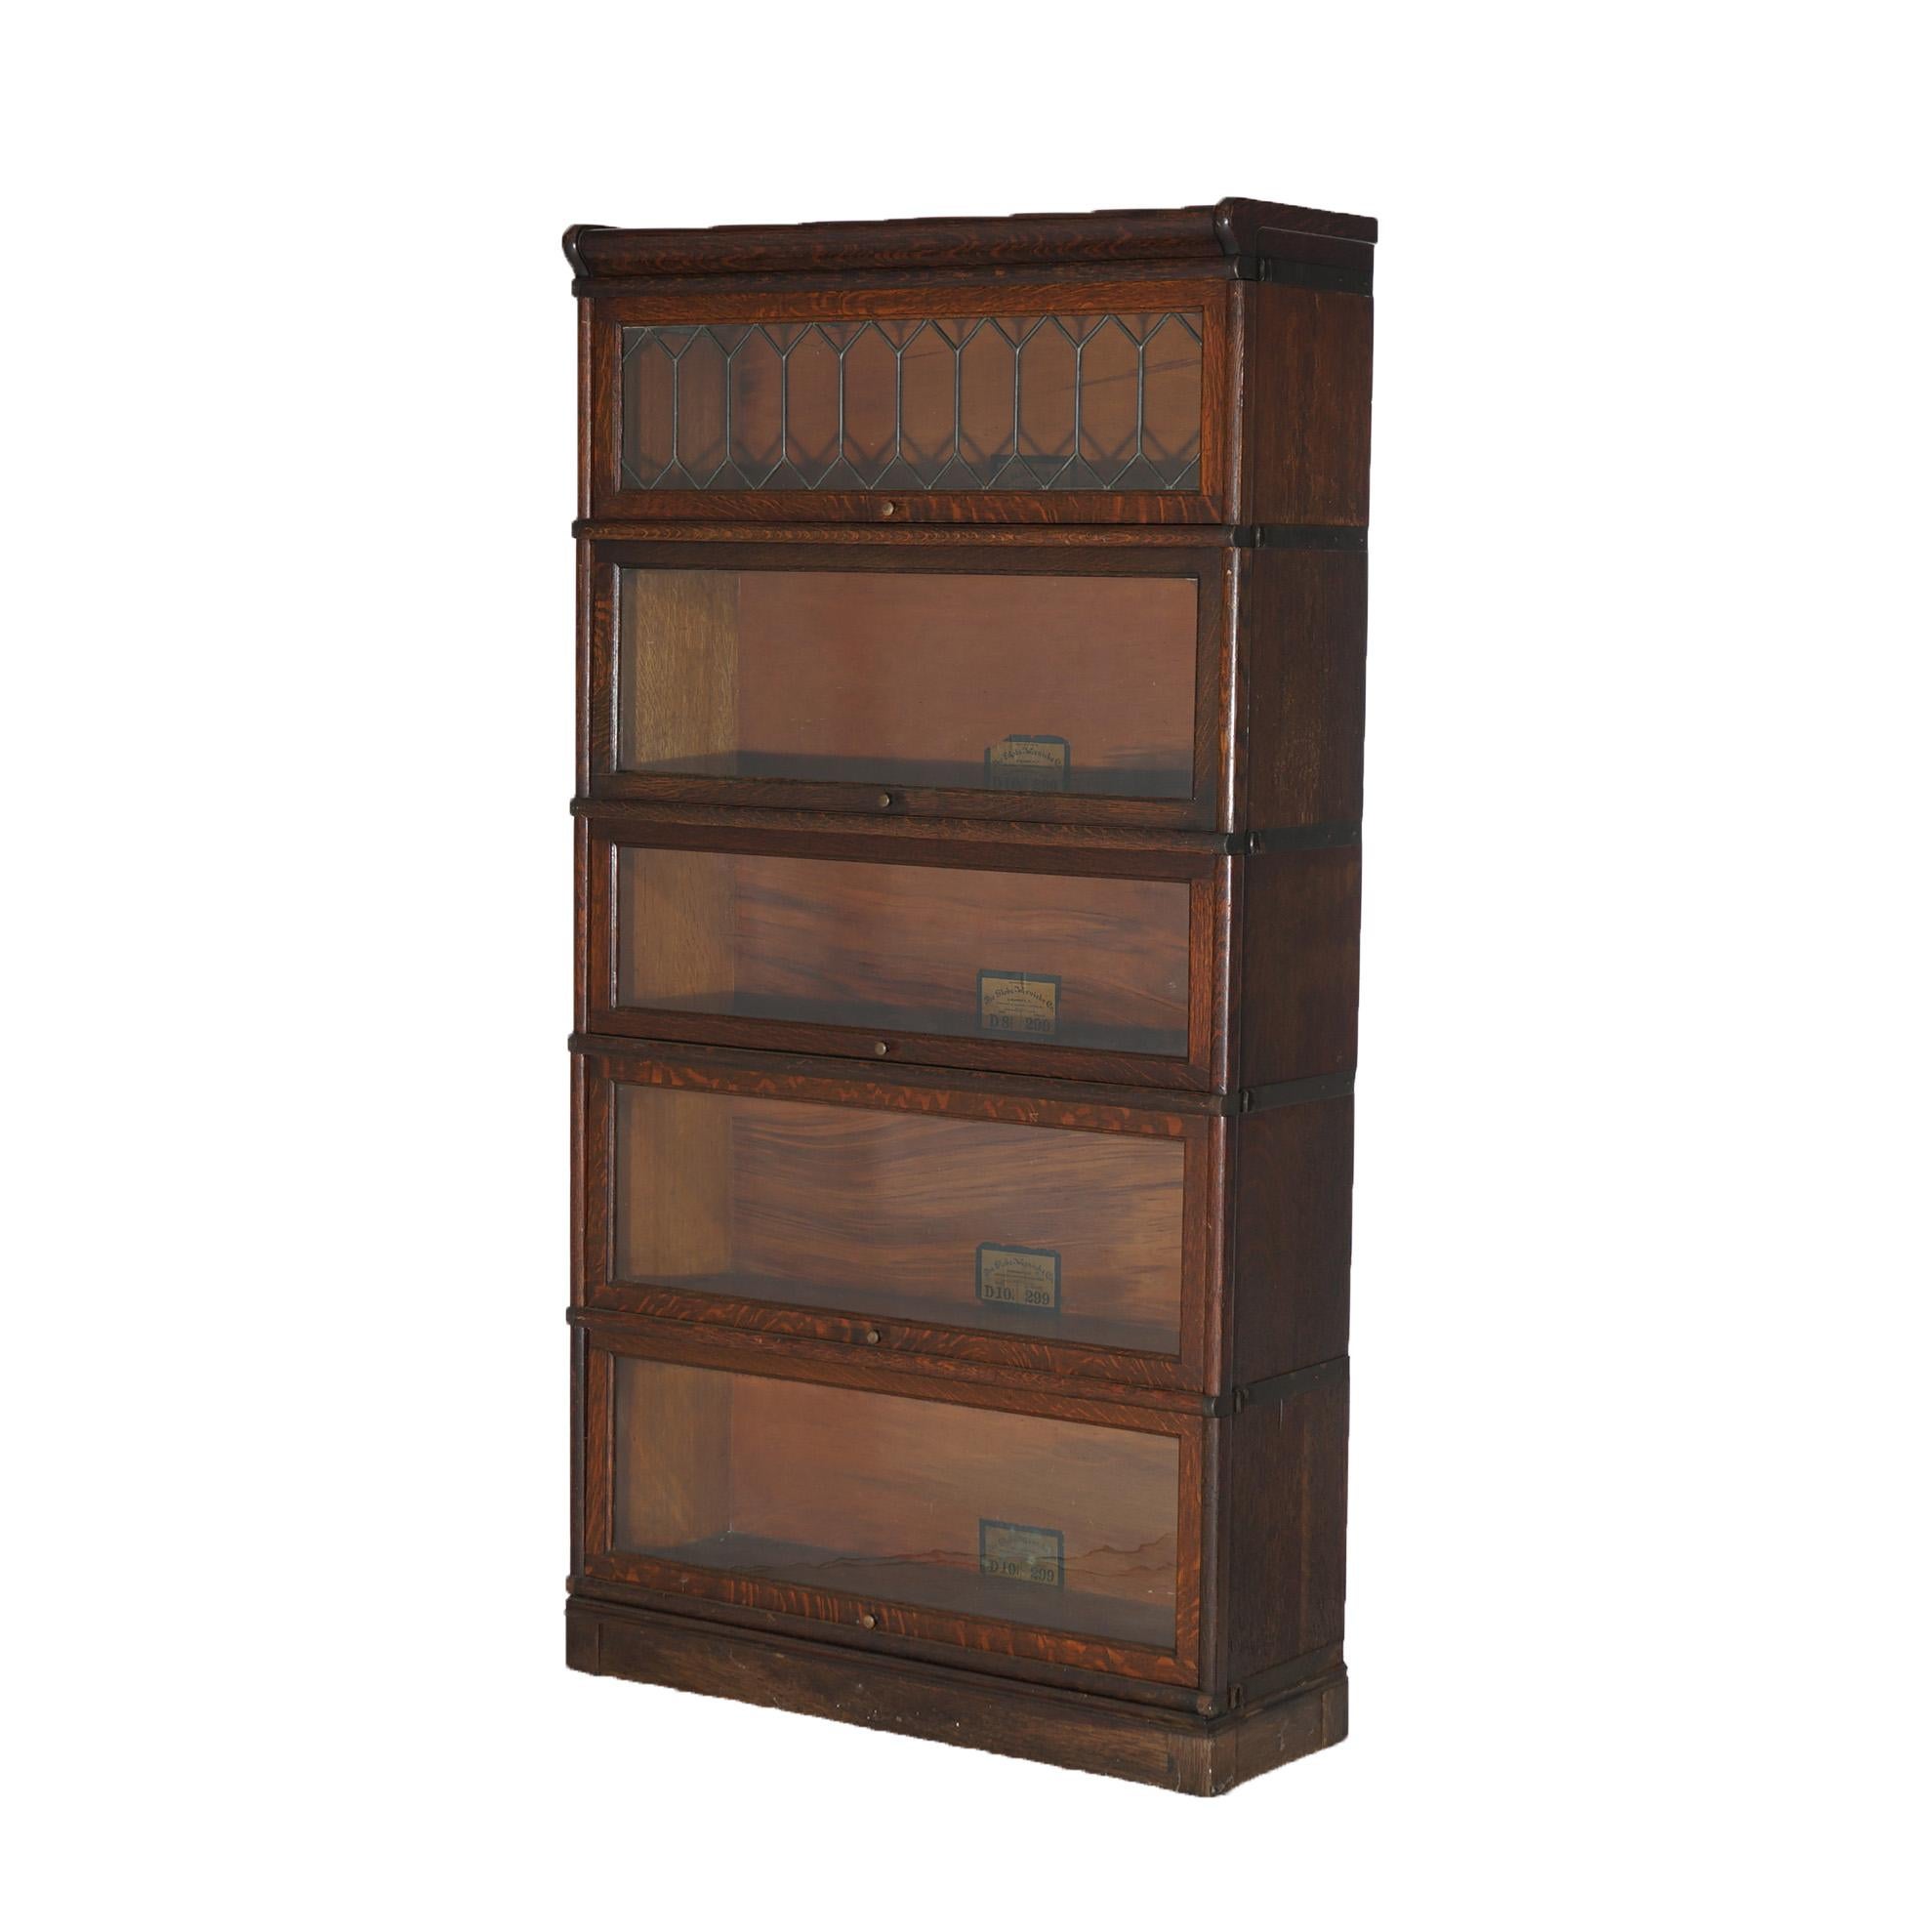 An antique Arts and Crafts barrister bookcase by Globe Wernicke offers quarter sawn oak construction with five stacks, each having pullout glass doors including one with leaded glass, and raised on square straight base, maker labels as photographed,